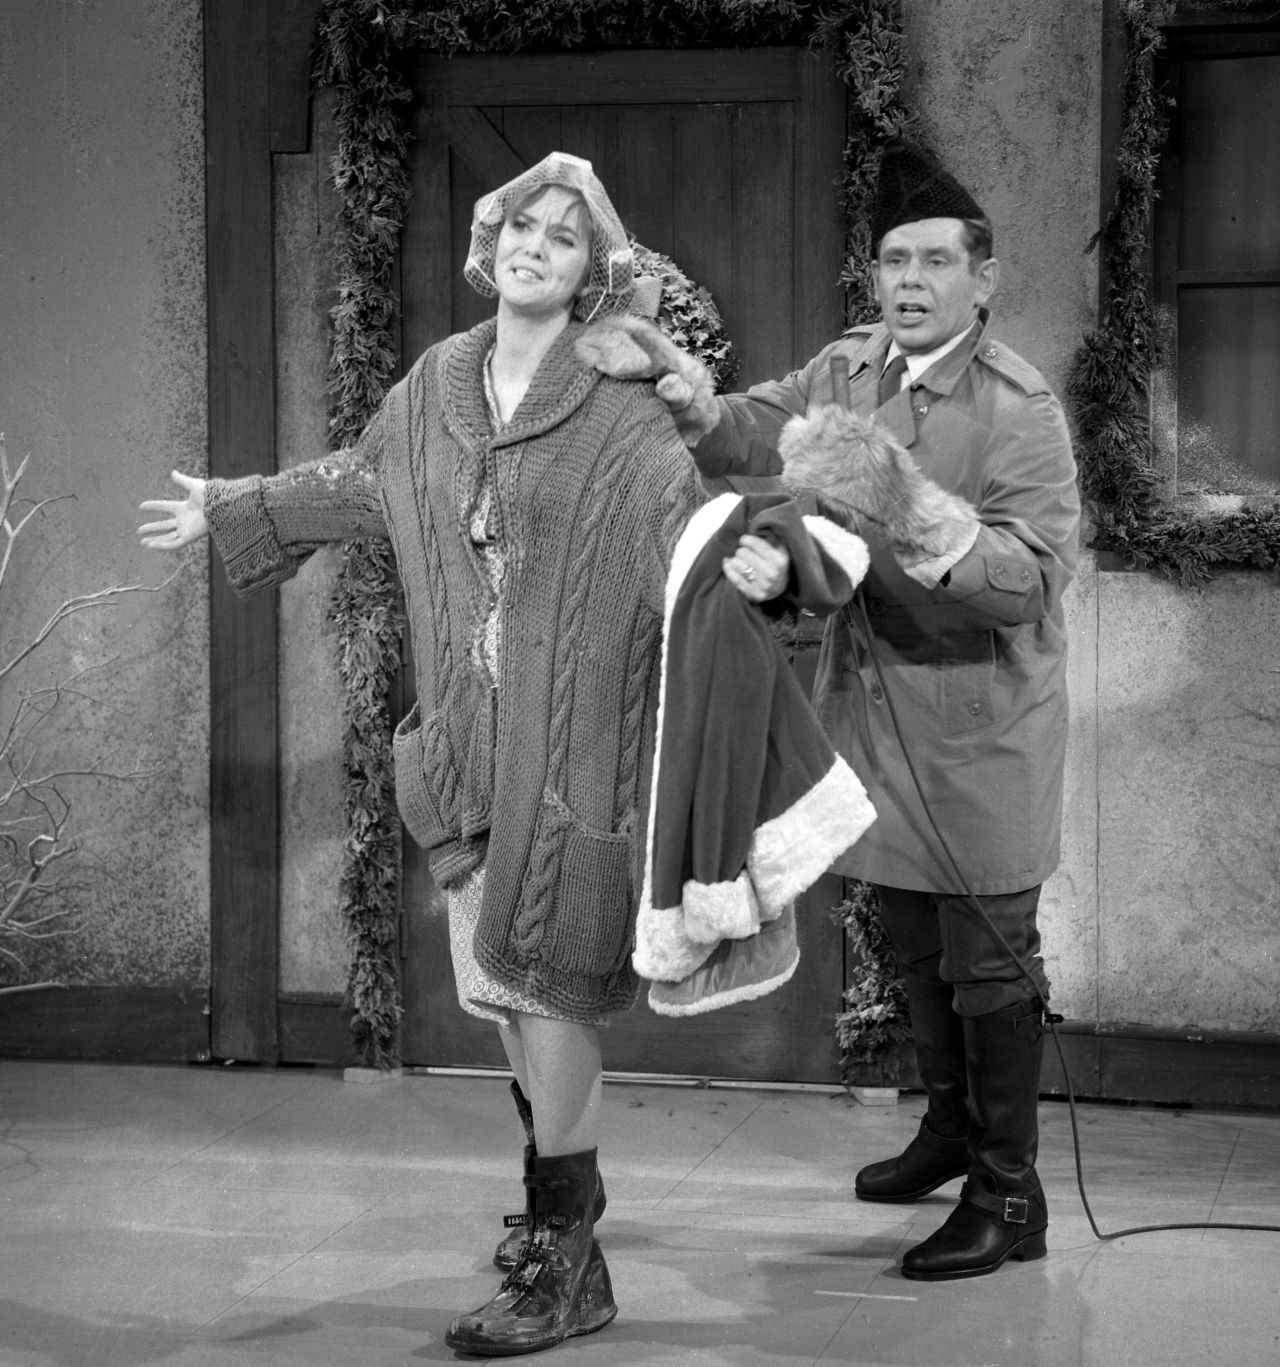 Stiller and his wife, Anne Meara, appear on "The Ed Sullivan Show" in 1967. The comedy team found fame in the 1960s before they started pursuing their individual careers in 1970.